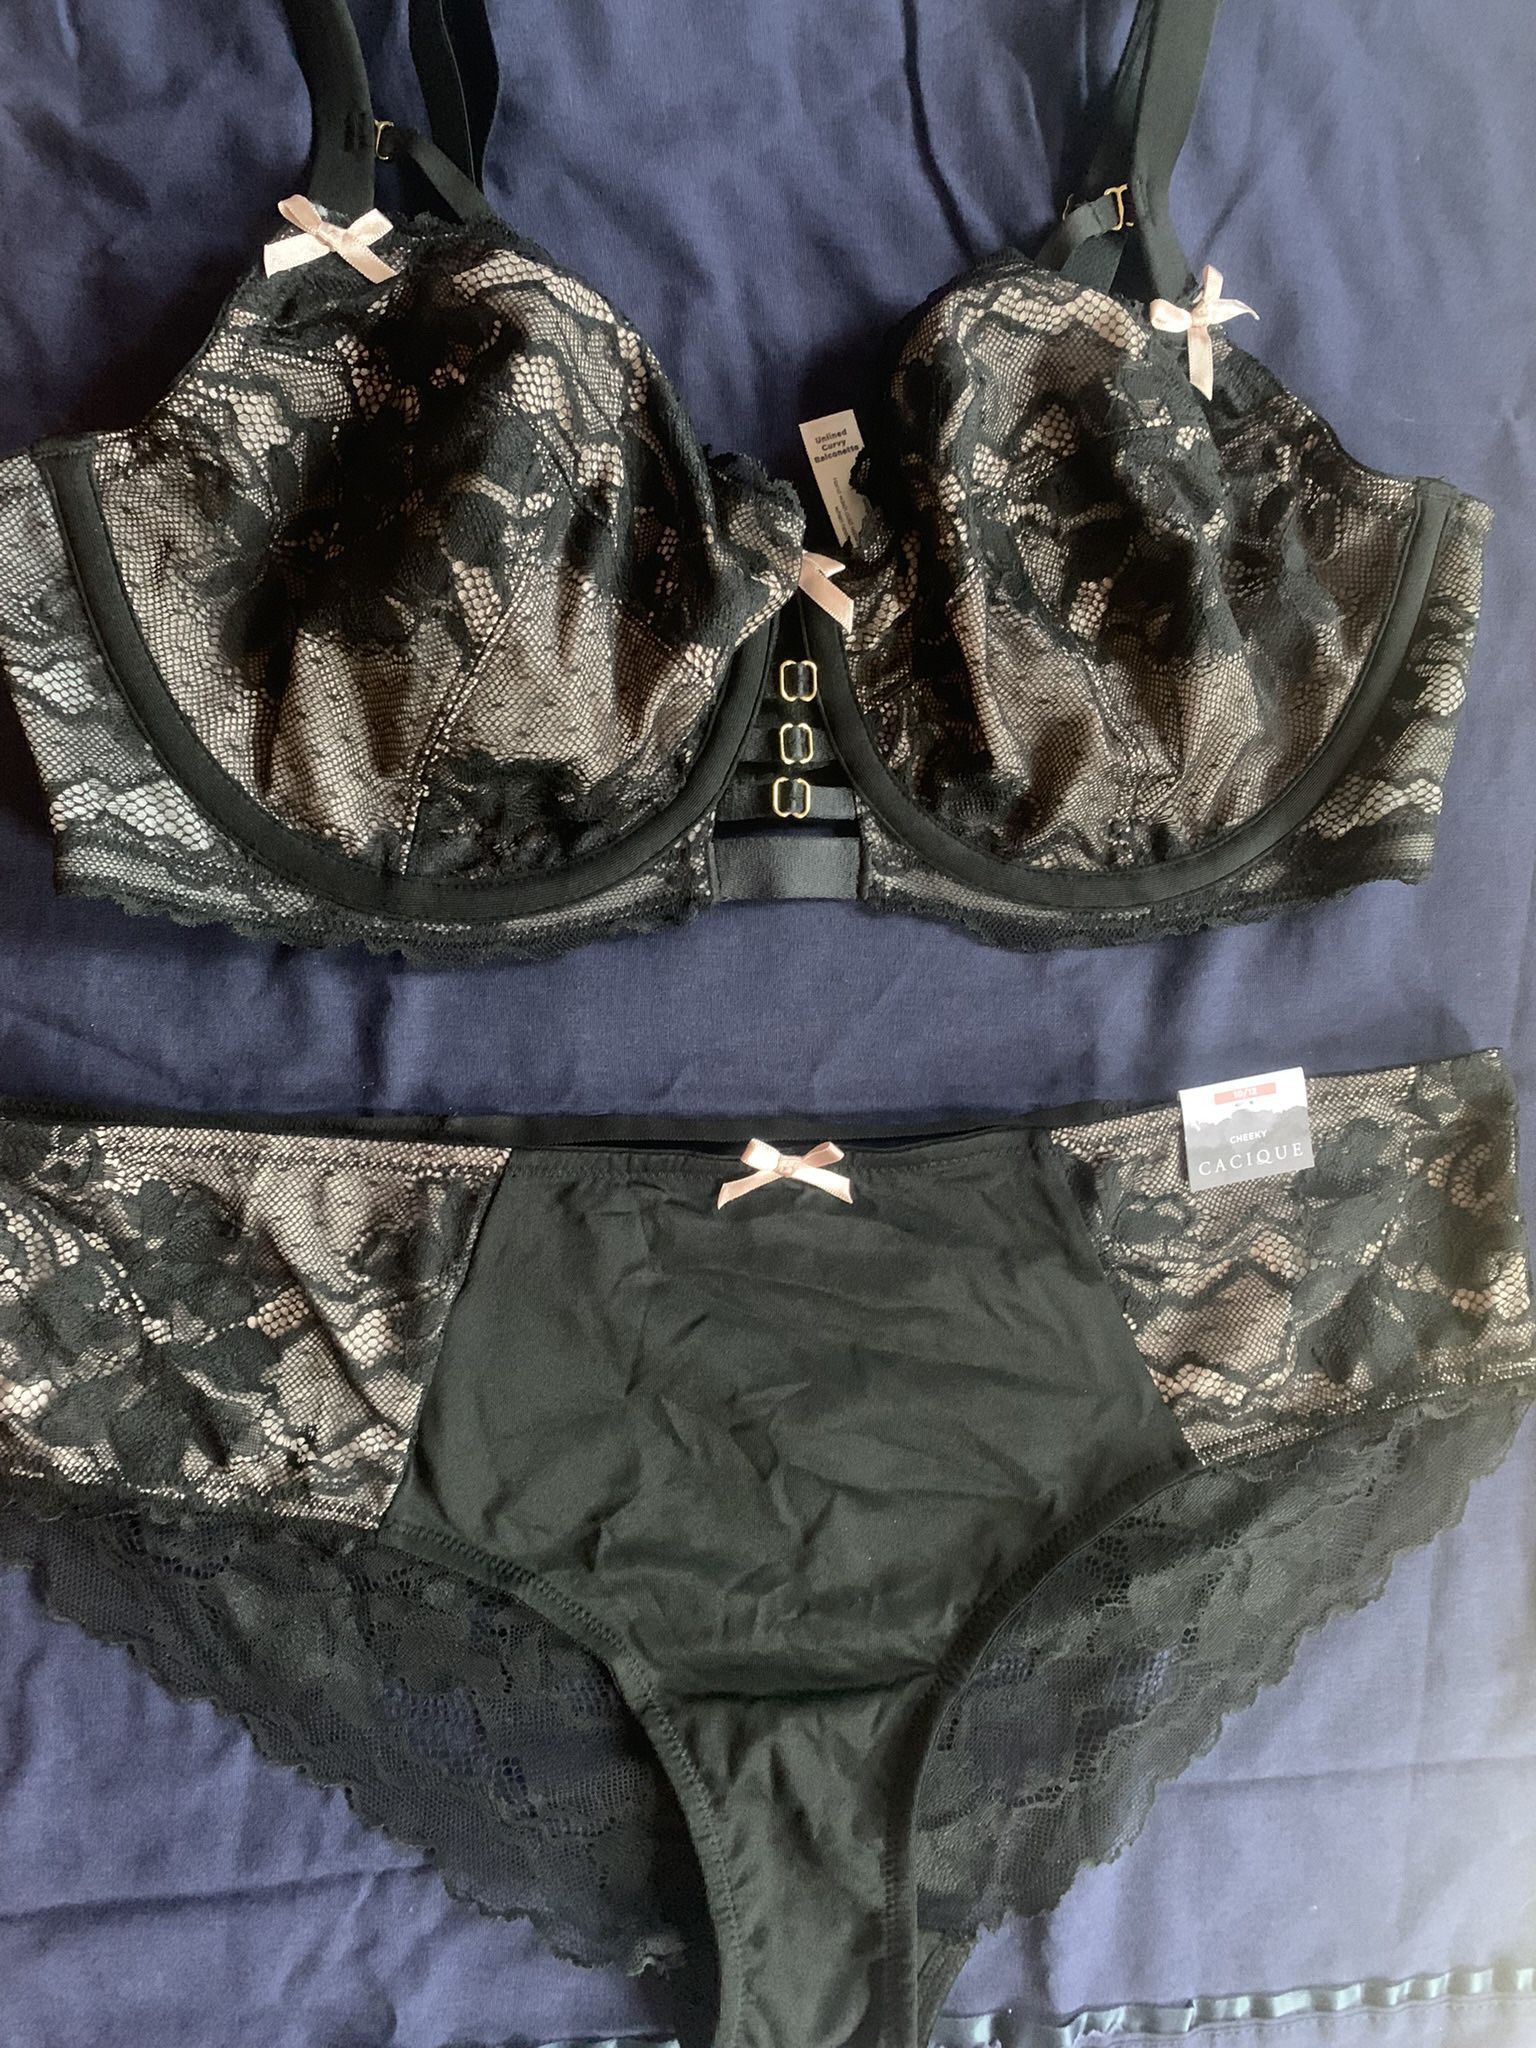 Cacique Lace Bra & Panty Set 38DD & 10/12 for Sale in Baltimore, MD -  OfferUp